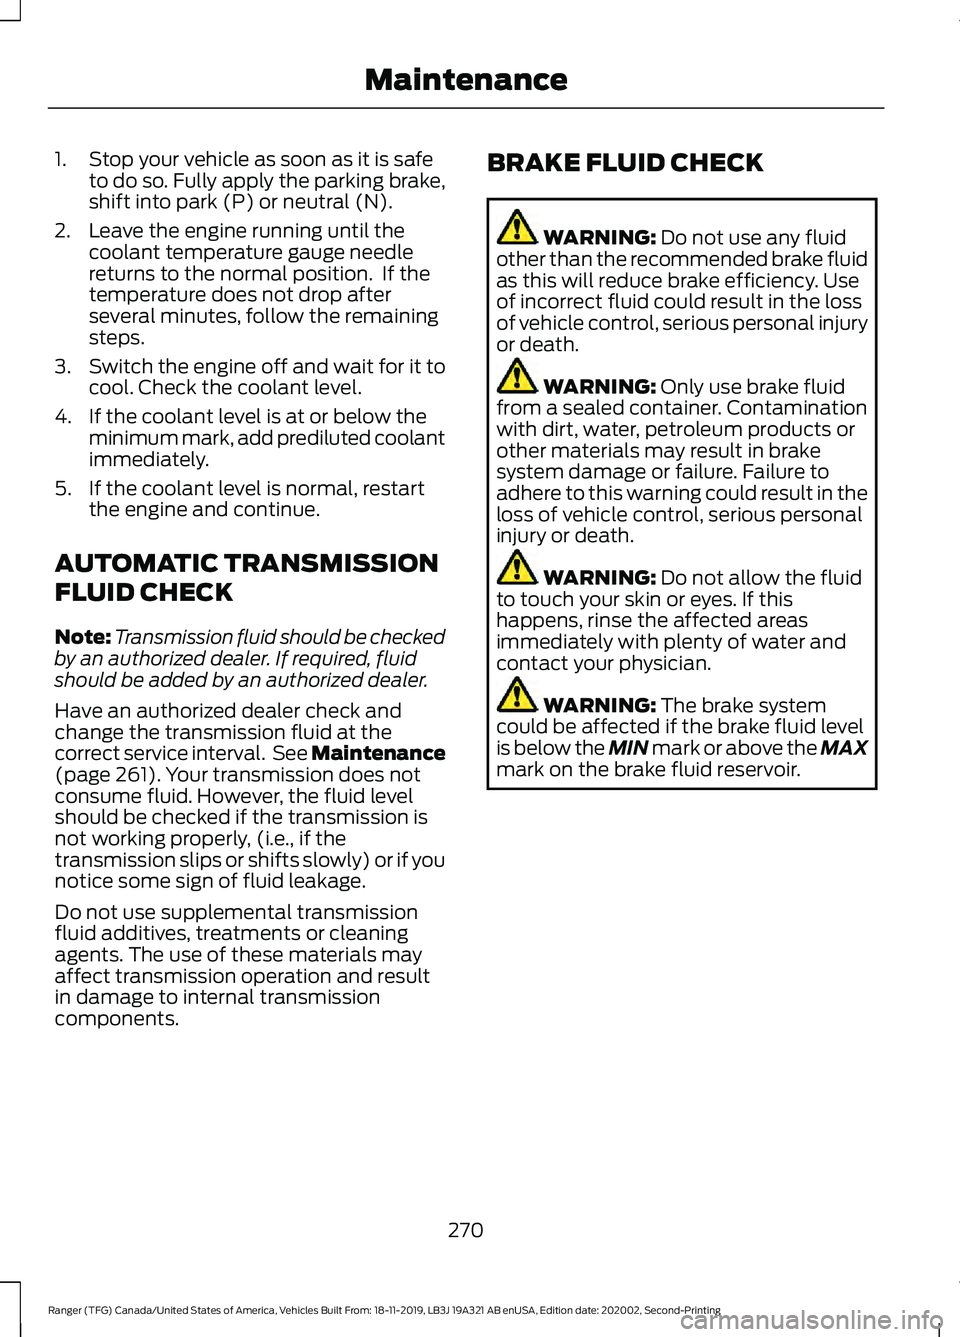 FORD RANGER 2020  Owners Manual 1. Stop your vehicle as soon as it is safe
to do so. Fully apply the parking brake,
shift into park (P) or neutral (N).
2. Leave the engine running until the coolant temperature gauge needle
returns t